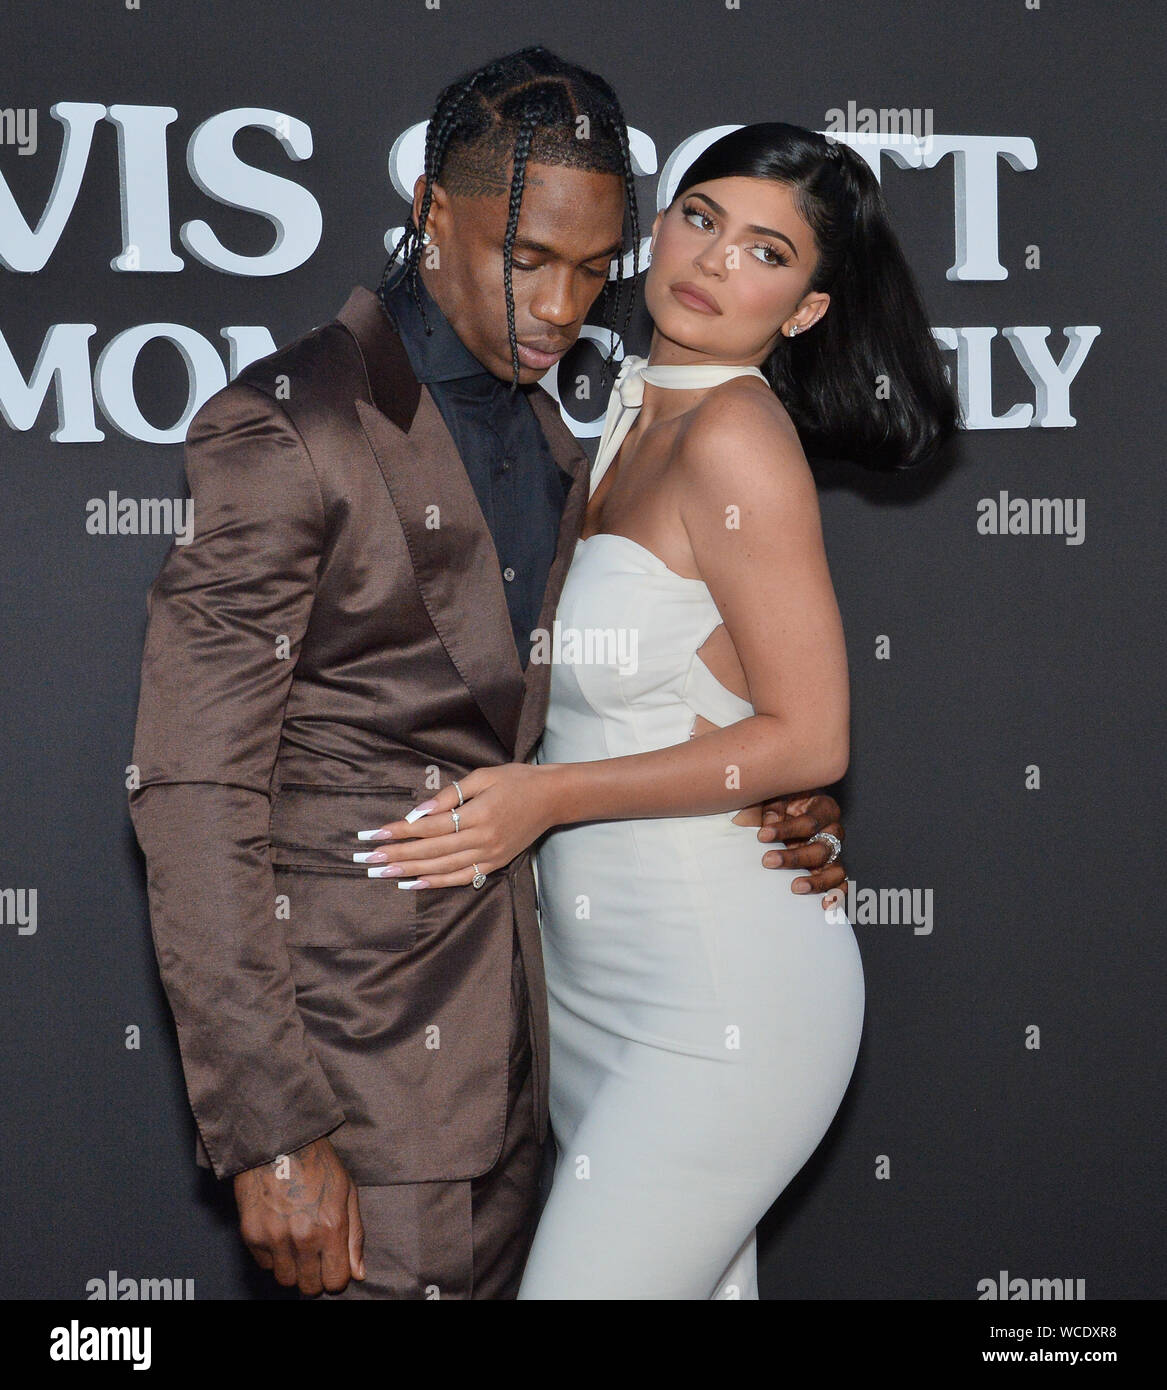 Santa Monica, California, USA. 28th Aug, 2019. Rapper Travis Scott and Kylie Jenner attend the premiere of Netflix's 'Travis Scott: Look Mom I Can Fly' at Barker Hangar on August 27, 2019 in Santa Monica, California. 'Travis Scott: Look Mom I Can Fly' traces the Houston rapper's rise to super-stardom, focusing on the months surrounding Scott's third album 'Astroworld'.  Photo by Jim Ruymen/UPI Credit: UPI/Alamy Live News Stock Photo